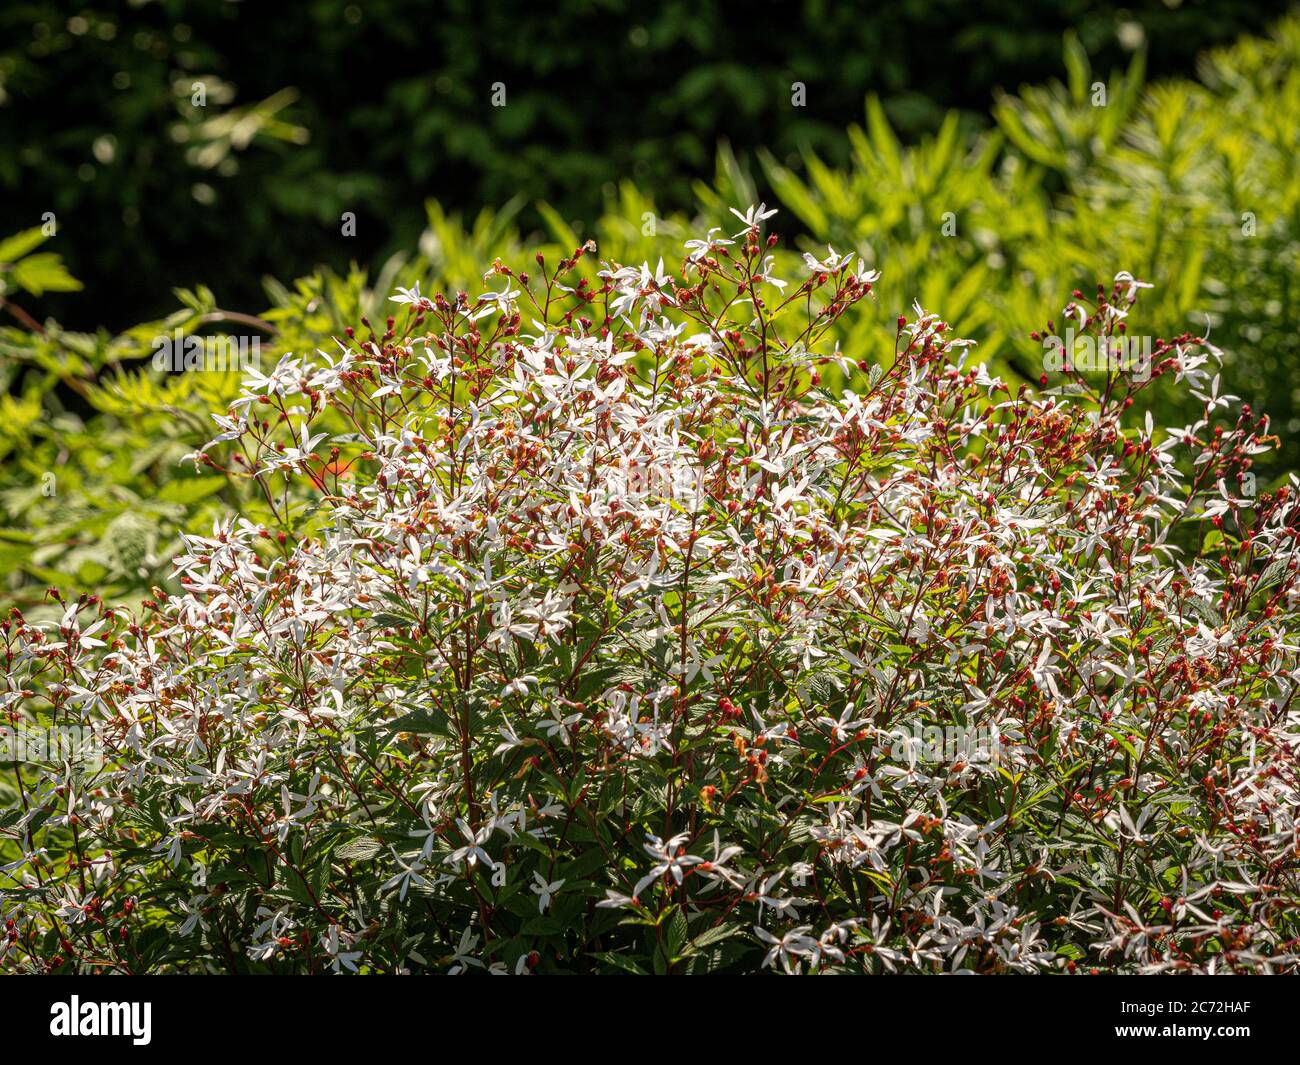 Gillenia trifoliata. Red stemmed shrub with small white star shaped flowers. Stock Photo